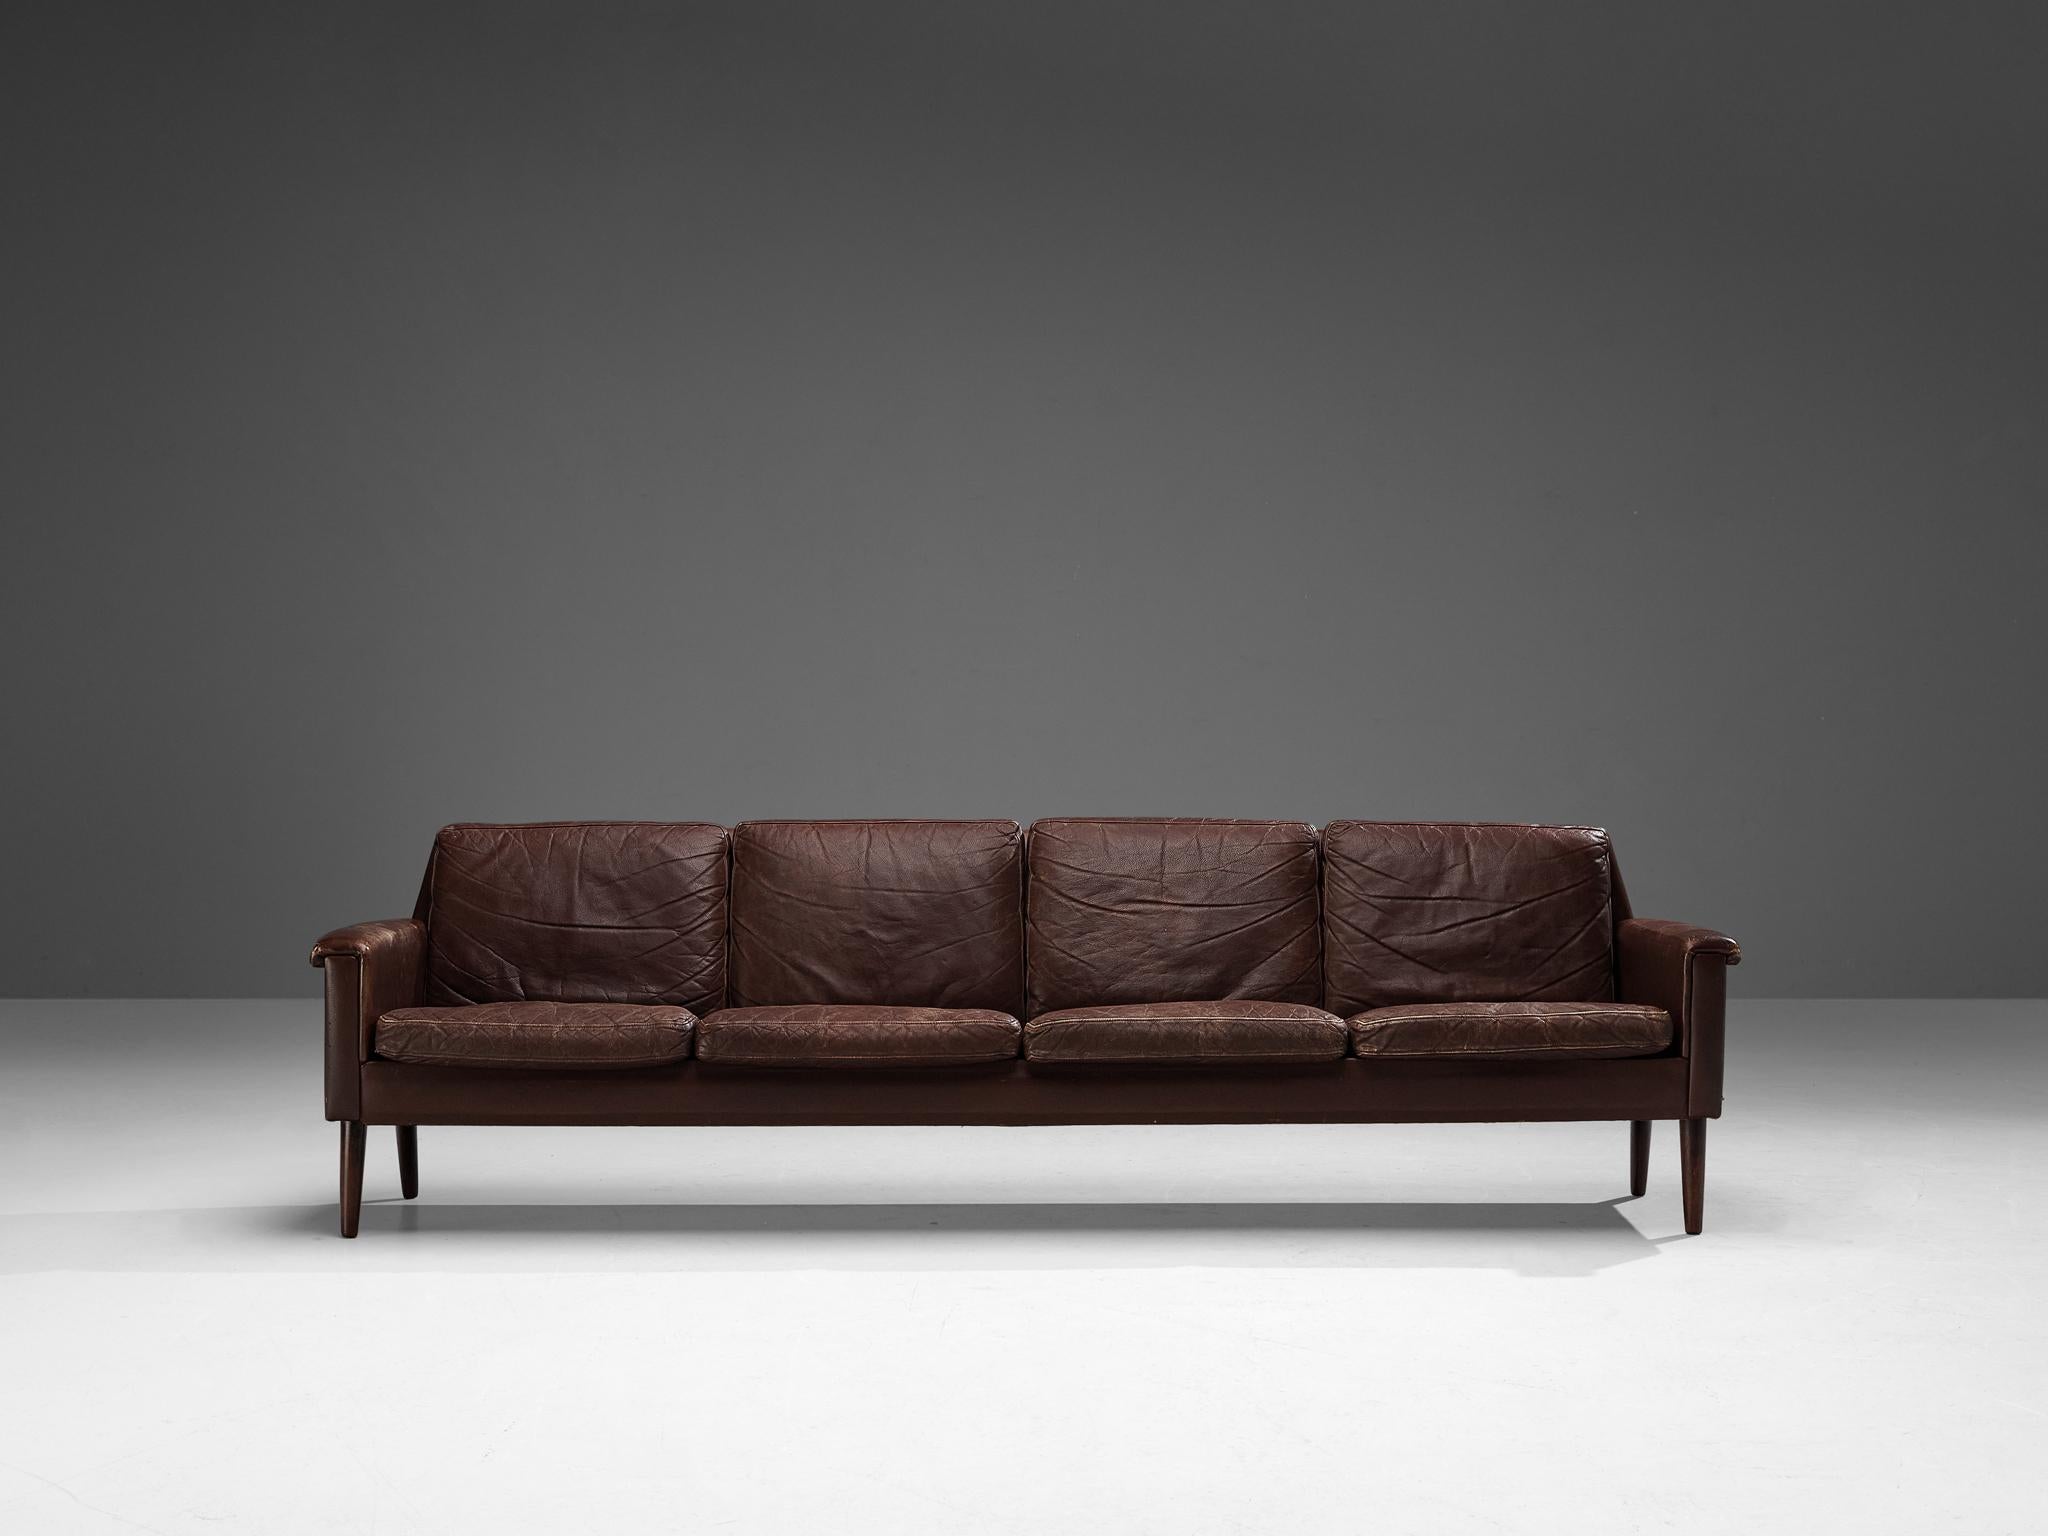 Sofa, leather, teak, Denmark, 1960s

This classic sofa of Danish origin features modest and subtle lines and angular shapes that emphasize the clear construction of the design. The armrests curl gently over the armrests, resulting in an elegant